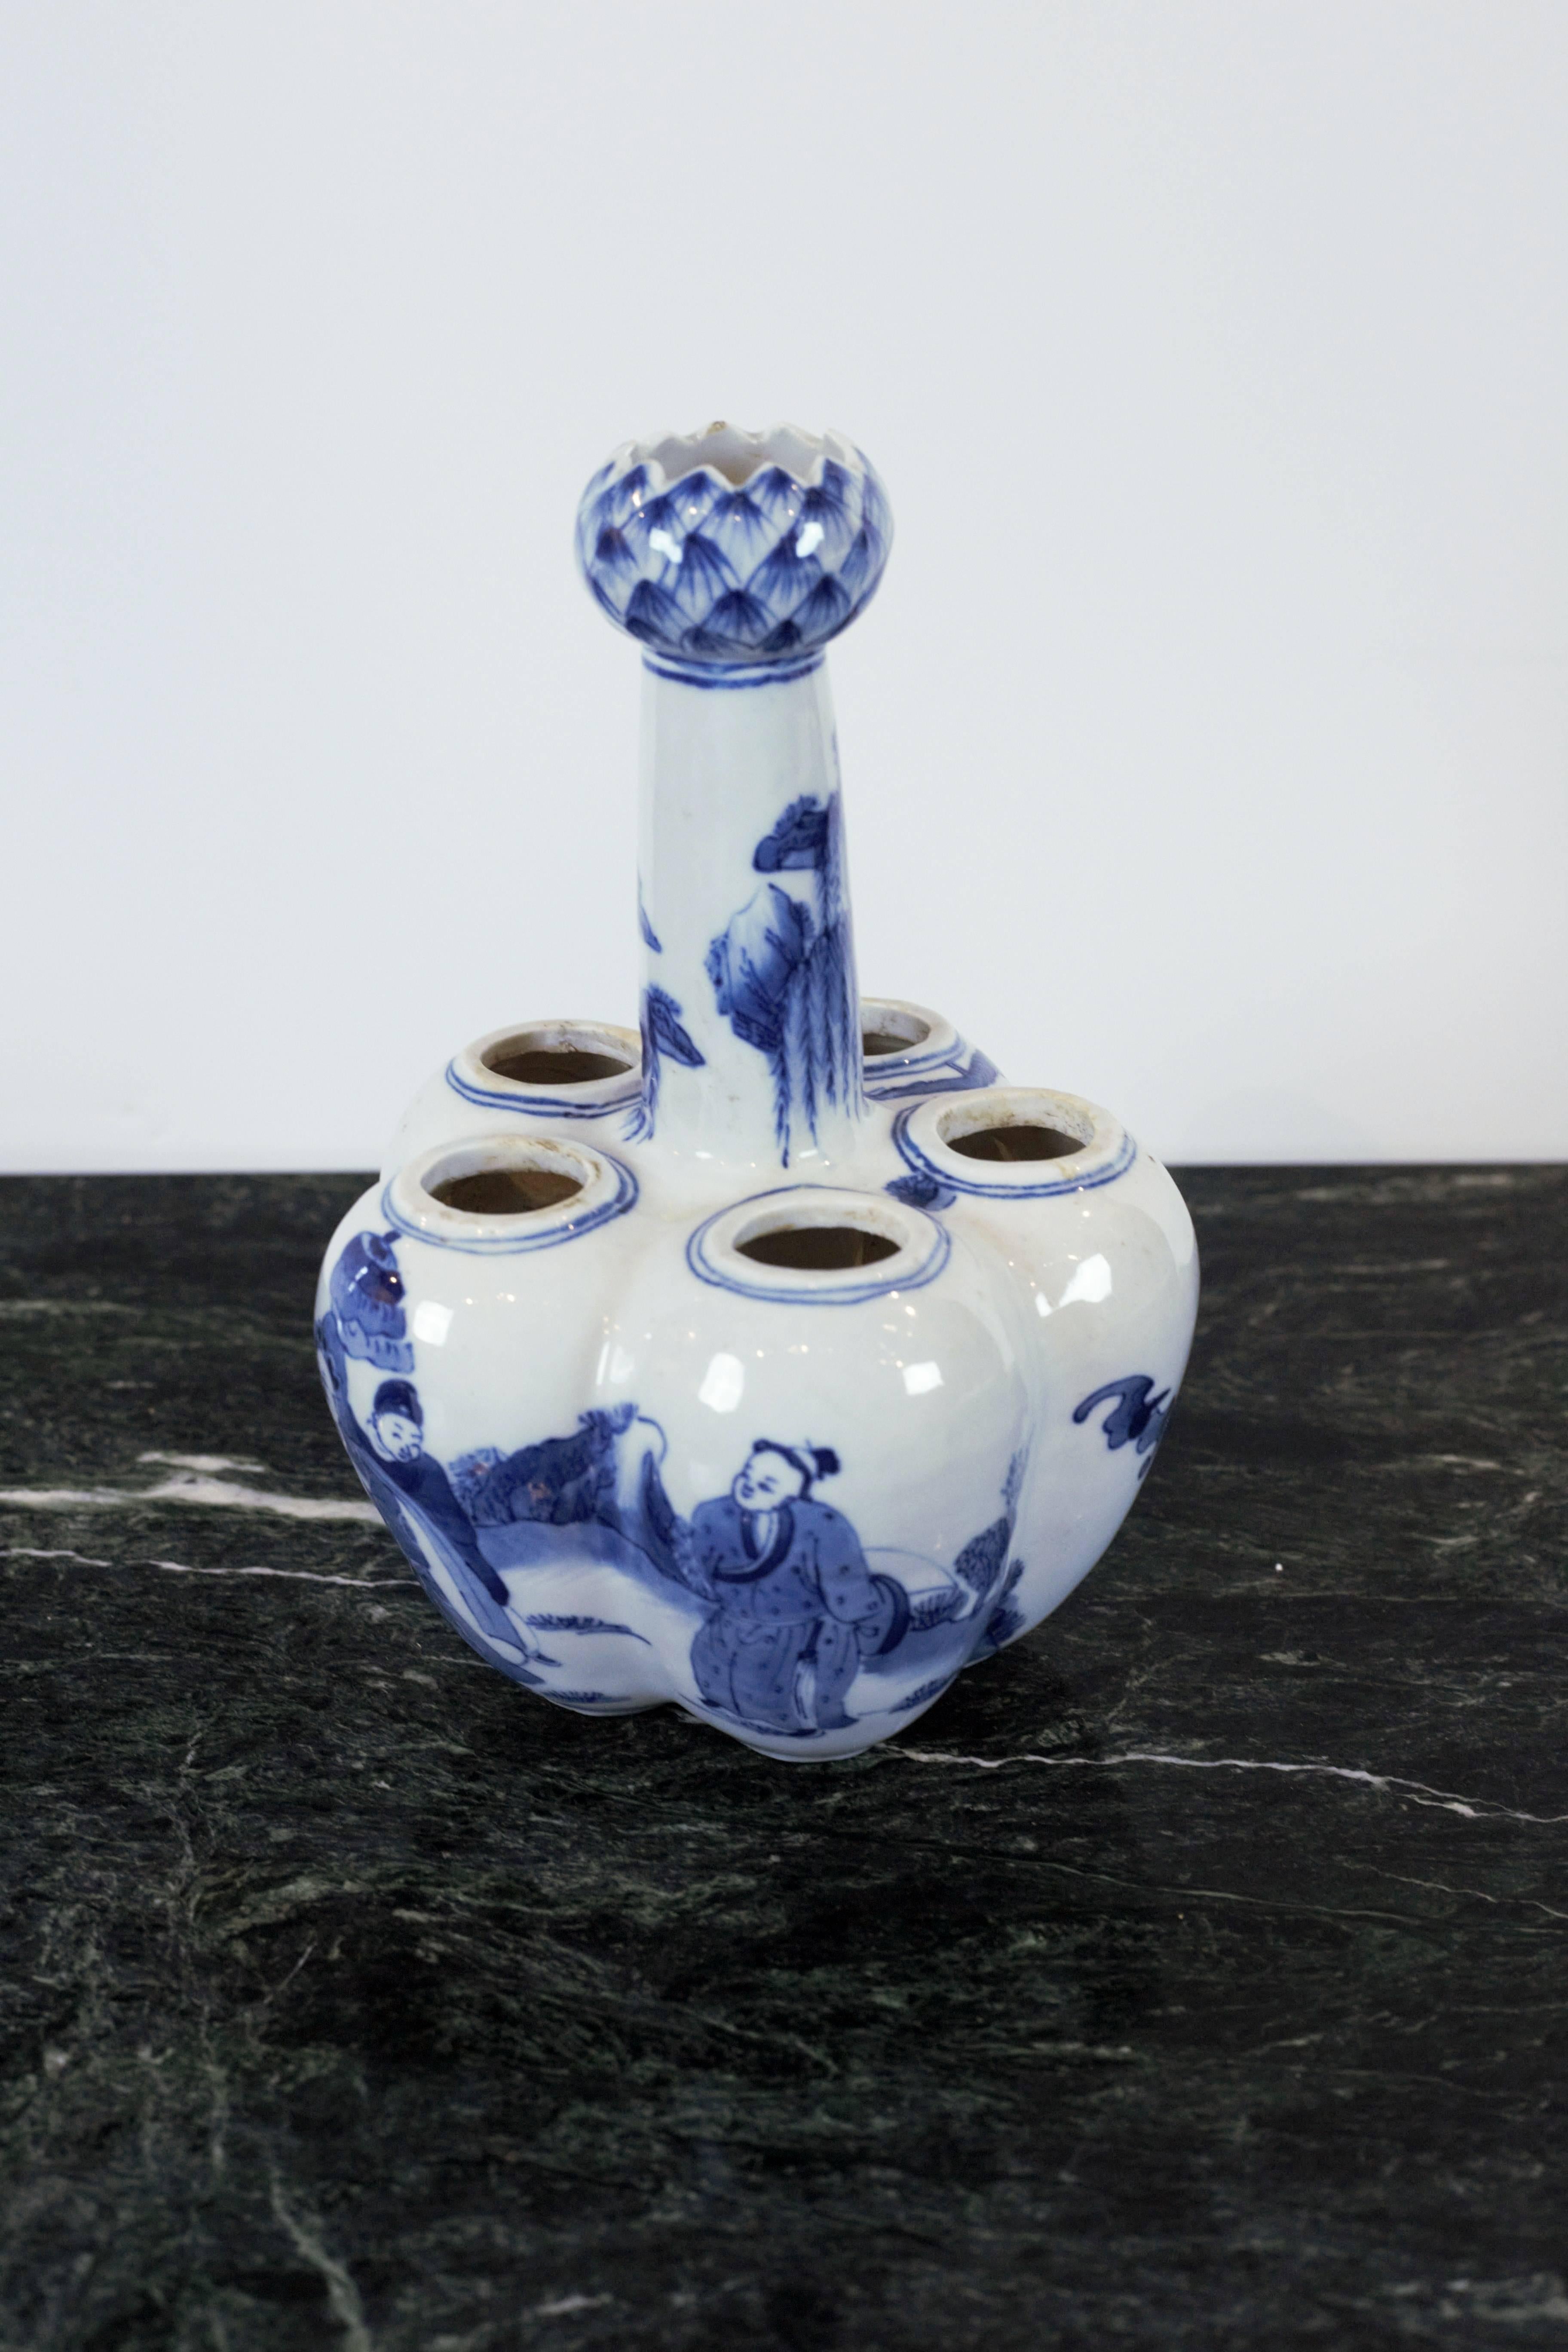 Charming hand-painted blue and white porcelain tulip vase with painted figural scenes.